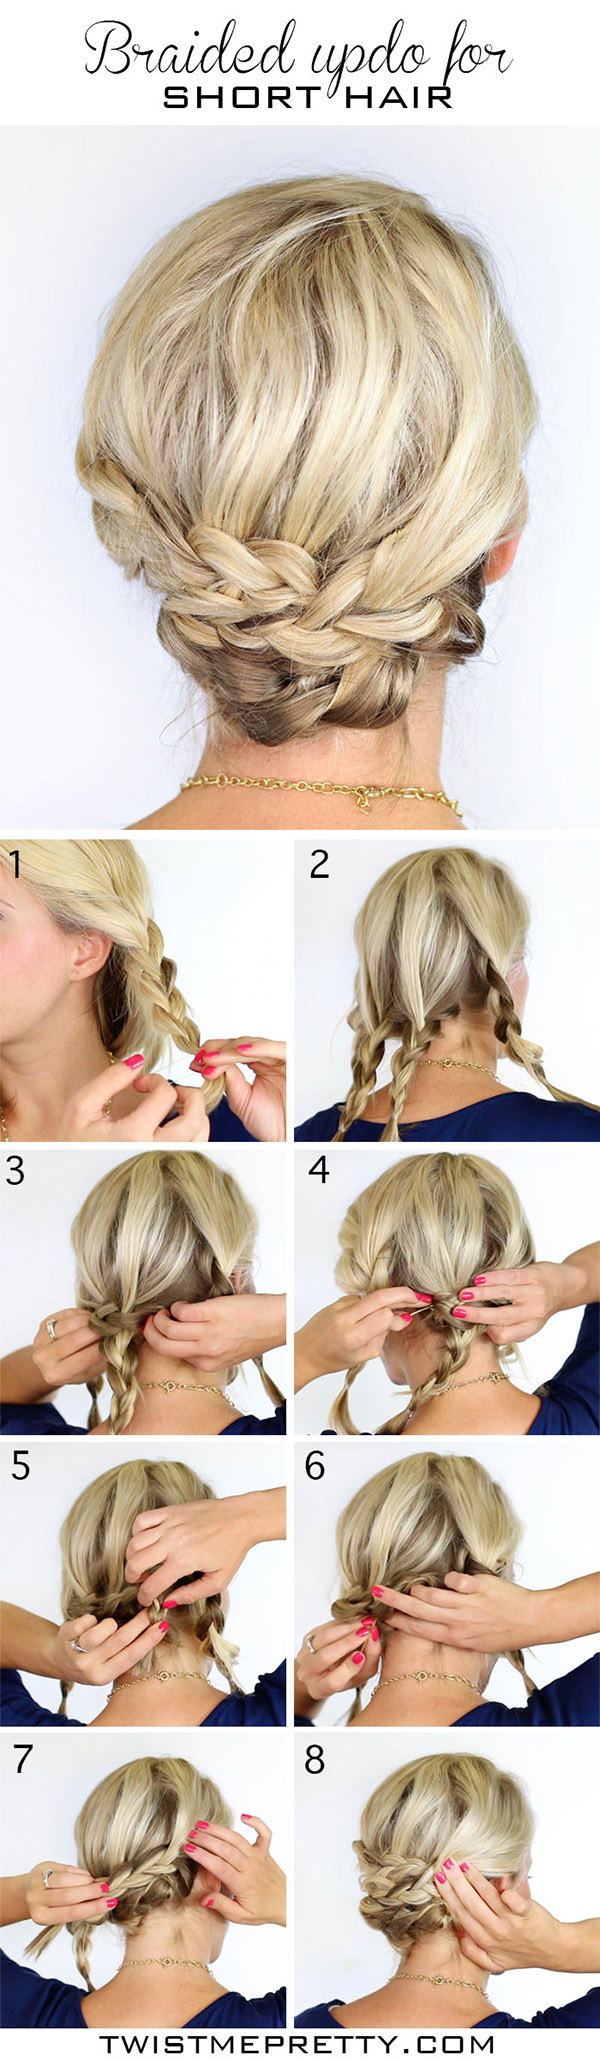 DIY Hairstyle For Short Hair
 20 DIY Wedding Hairstyles with Tutorials to Try on Your